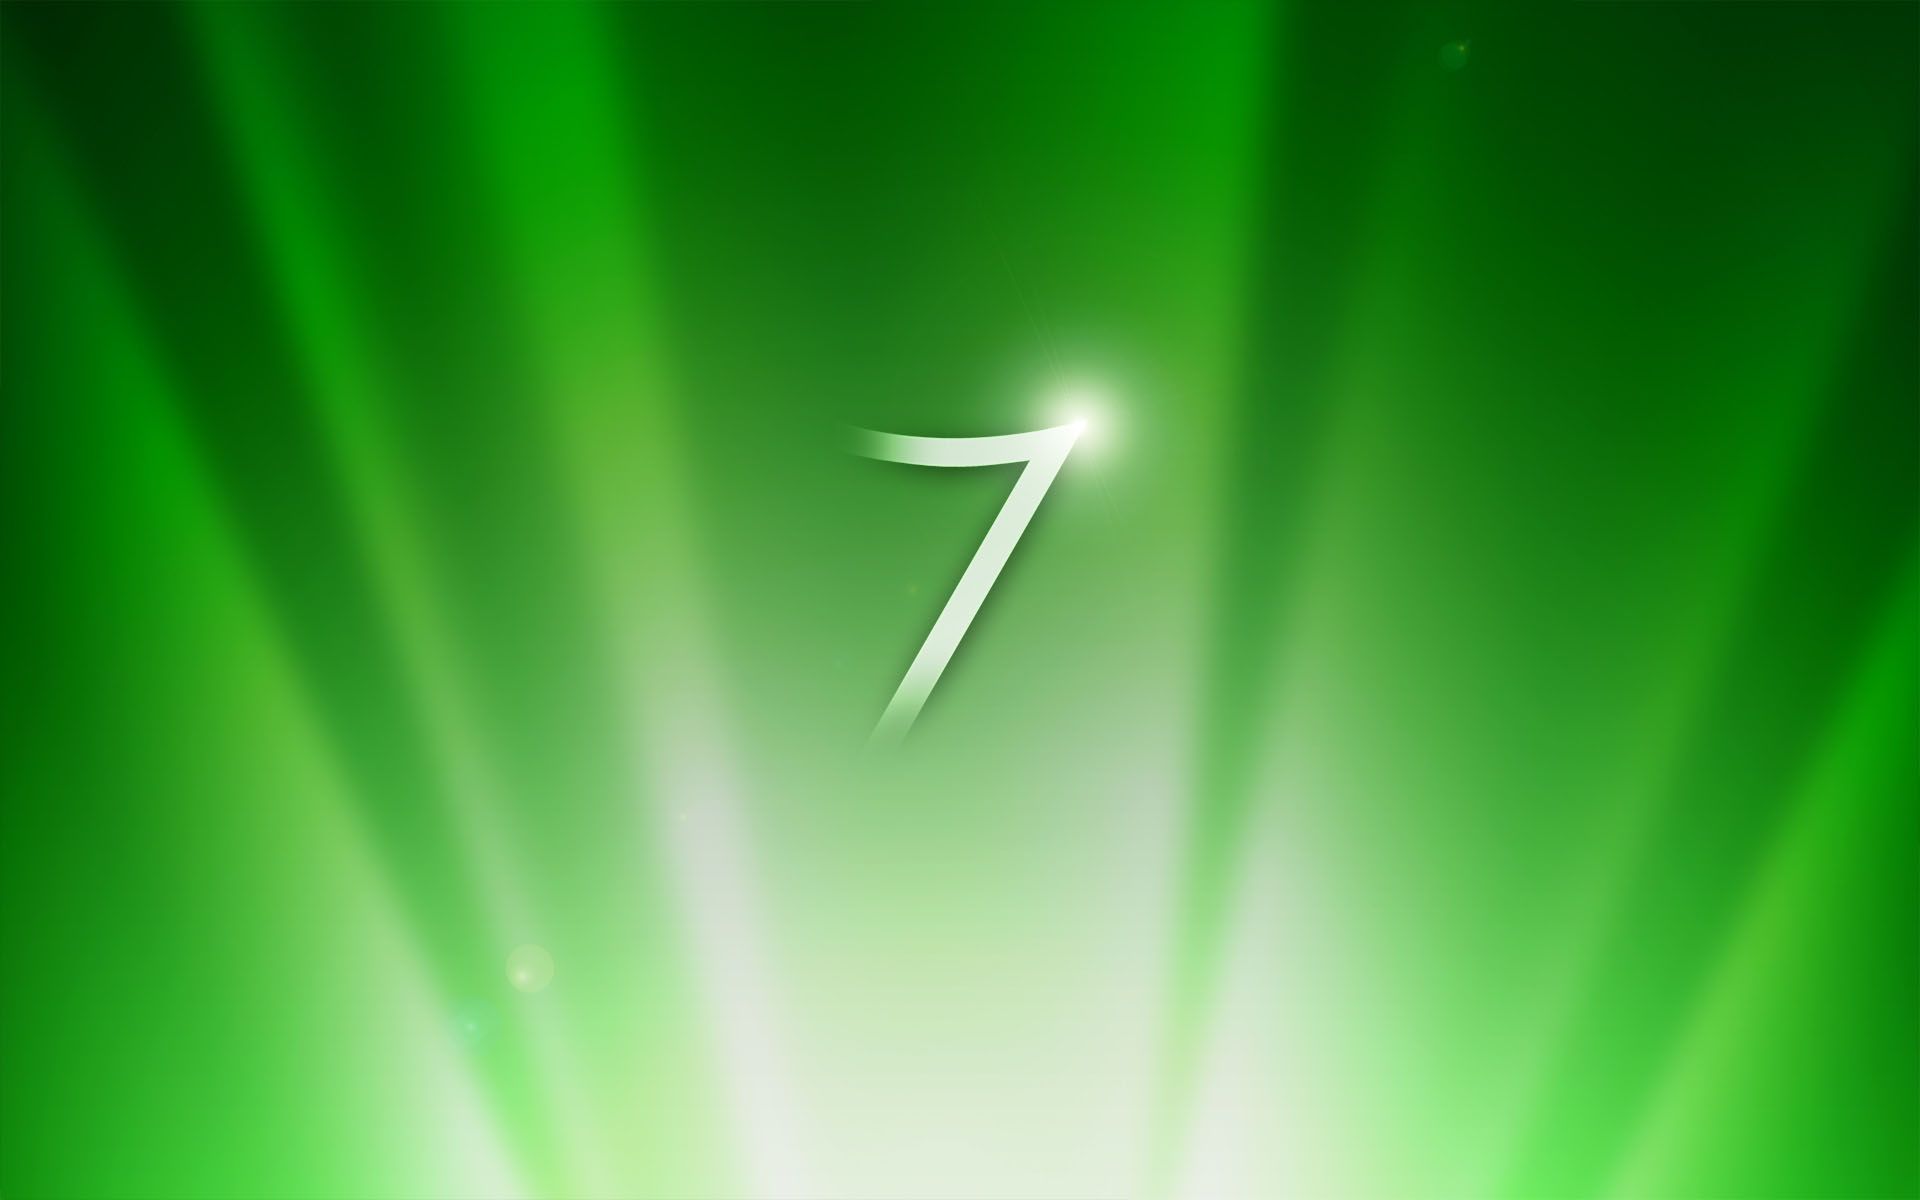 Windows 7 Green Theme wallpaper and image, picture